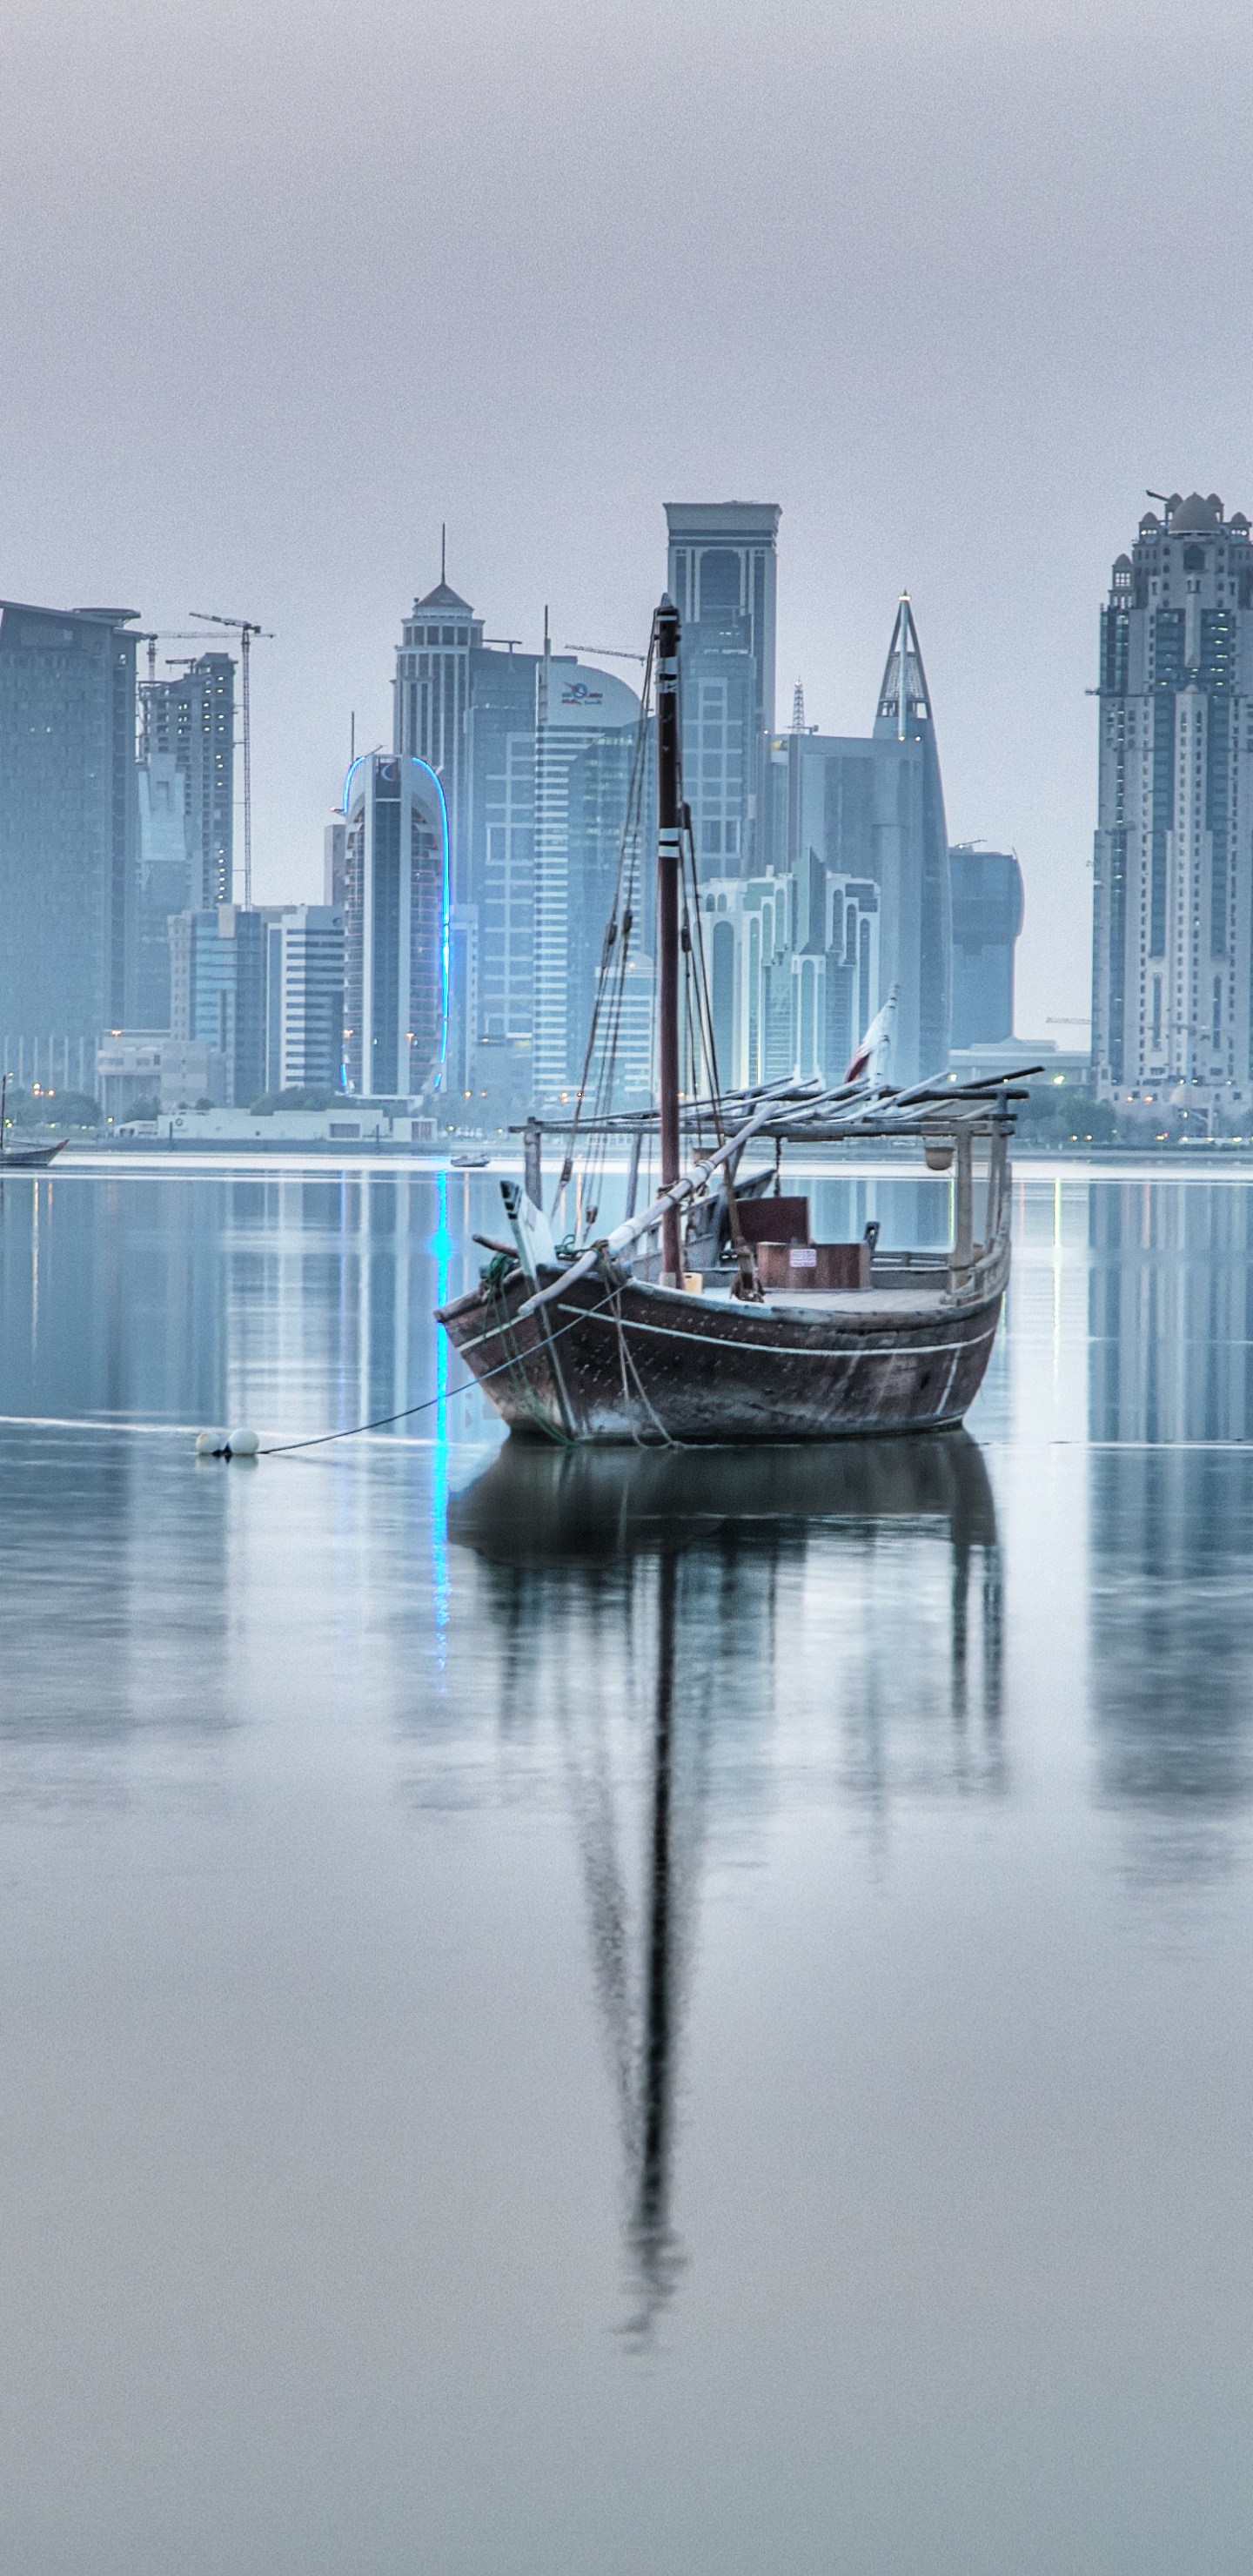 Boats in the Water by the Doha Cityscape